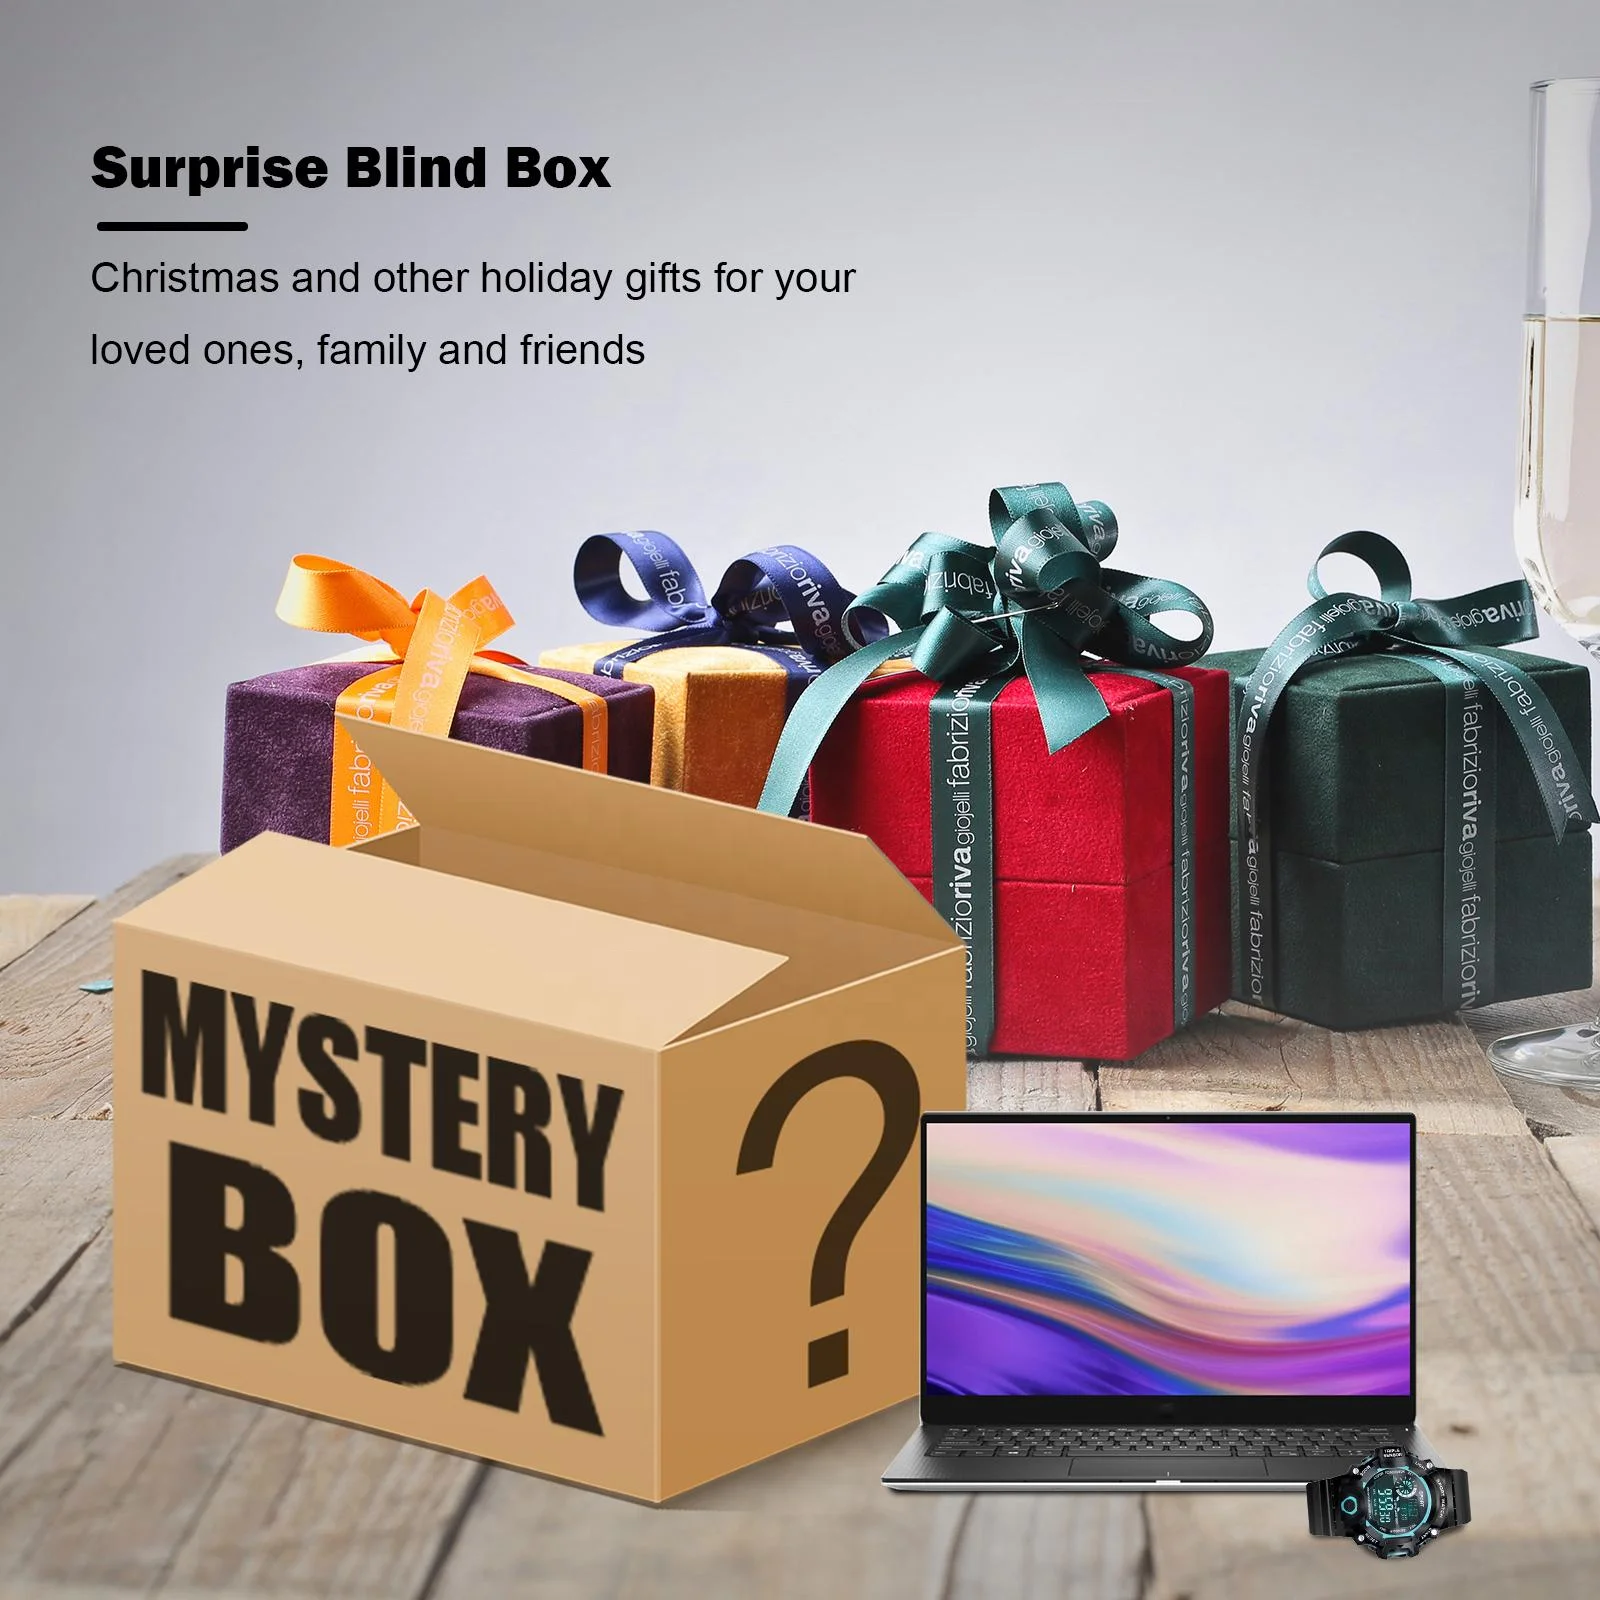 3C electronic products mysterious lucky gift box has a chance to open: wireless earphones, cameras, drones, more gifts